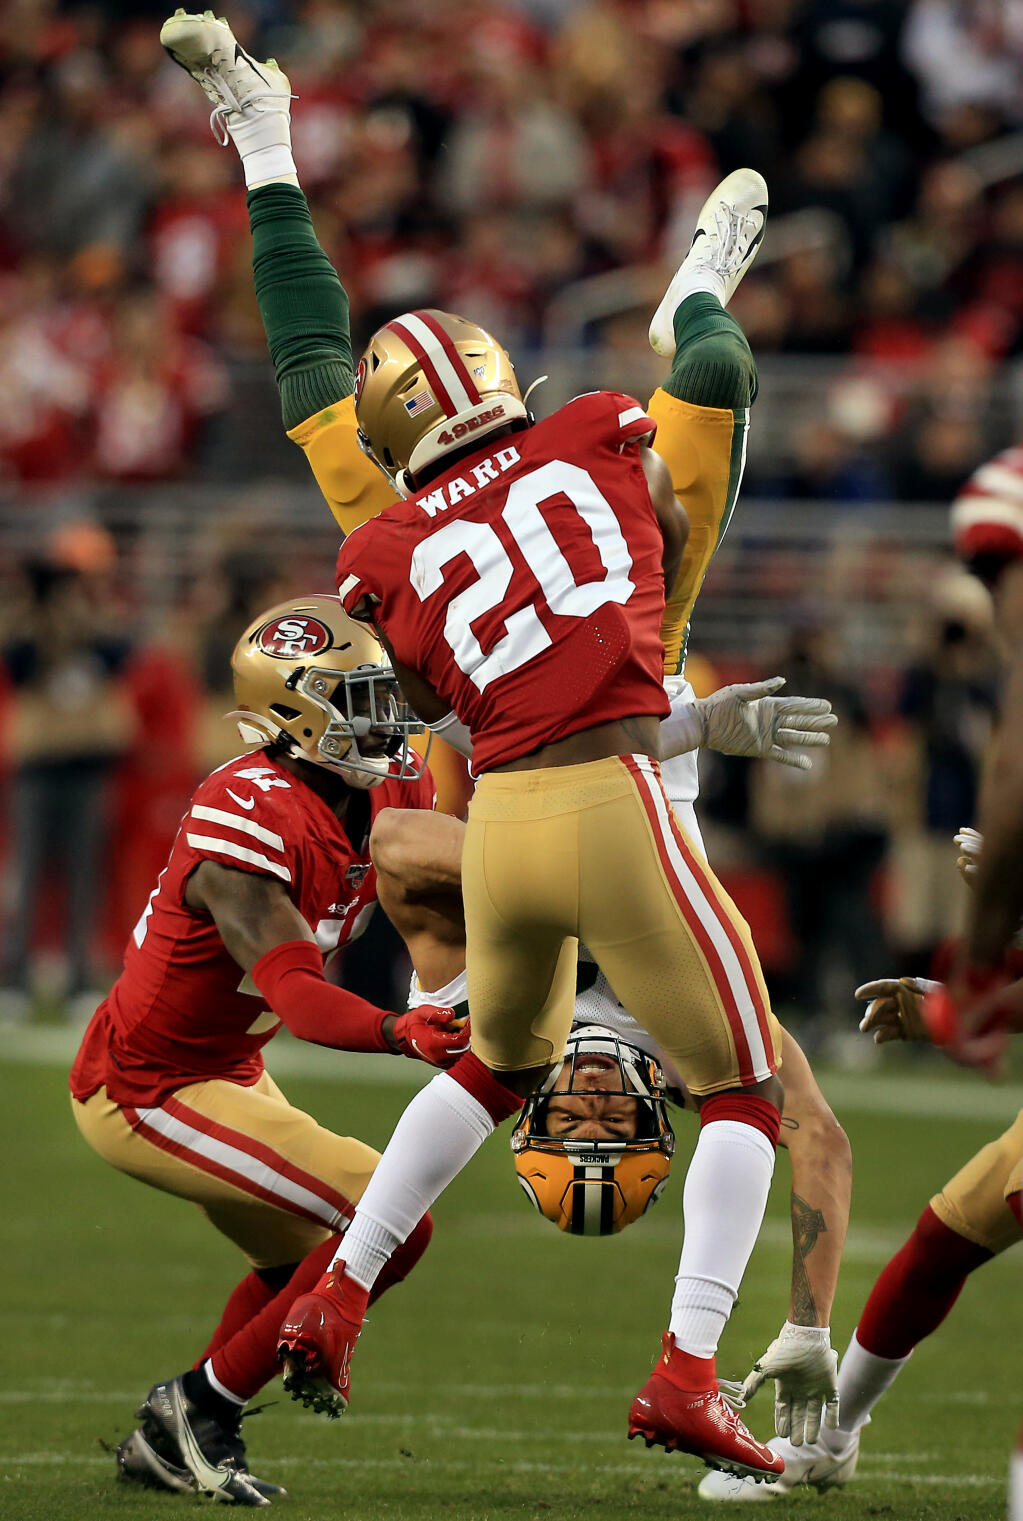 Jimmie Ward of the 49ers plants Allen Lazard of the Packers after a pass reception during San Francisco's 37-20 win over Green Bay in the NFC Championship game, Sunday, January 19, 2020 in Santa Clara. (Kent Porter / The Press Democrat) 2020